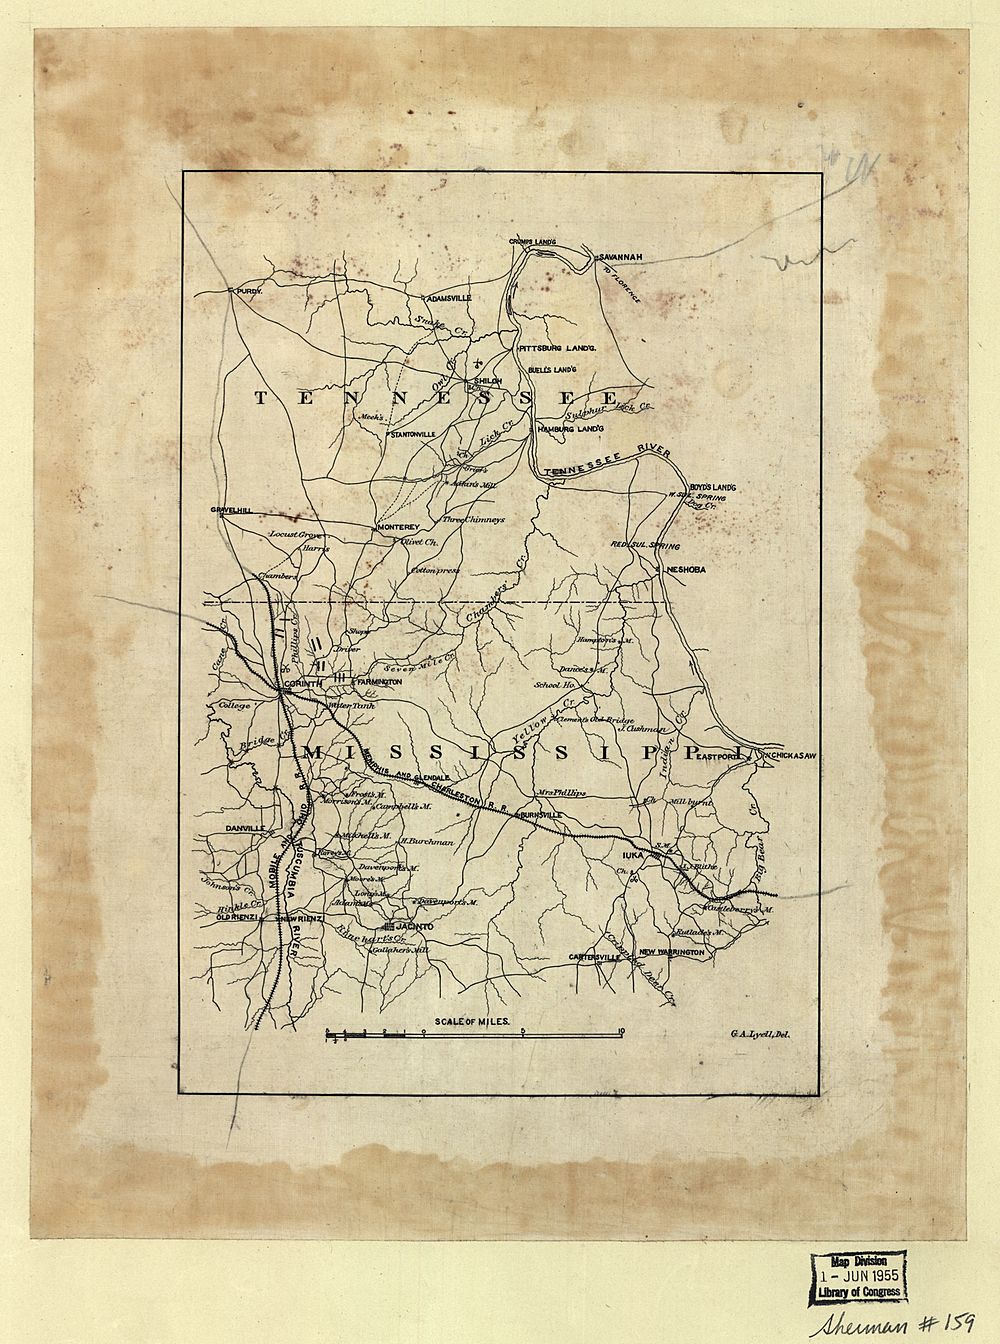 1862 map showing the location of Danville